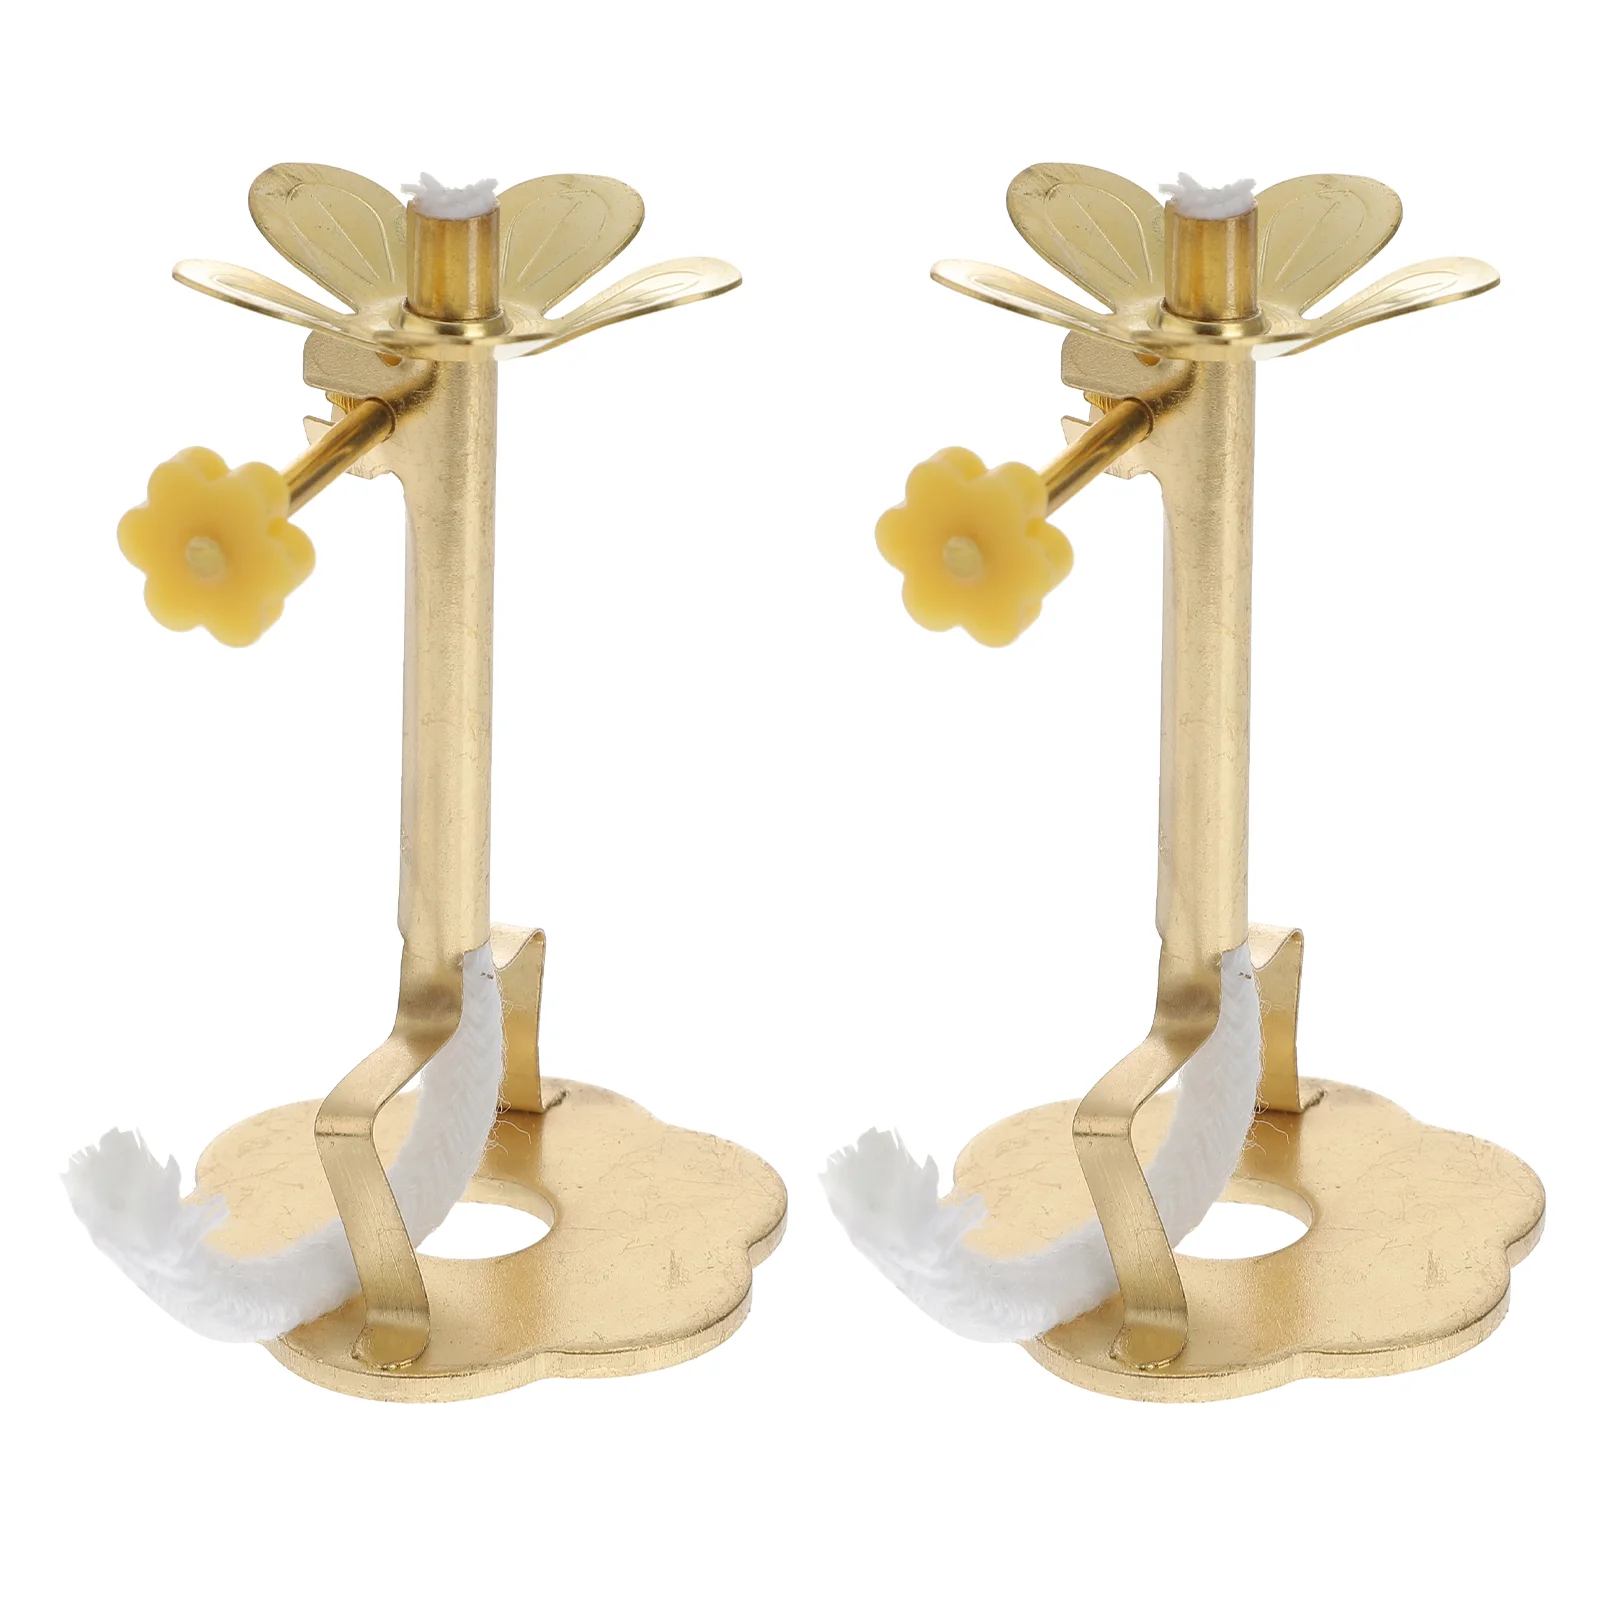 

2 Pcs Lamp Holder Hall Supply Home Wick Stand Ornament Vintage Lantern House Gadgets Telescopic Small